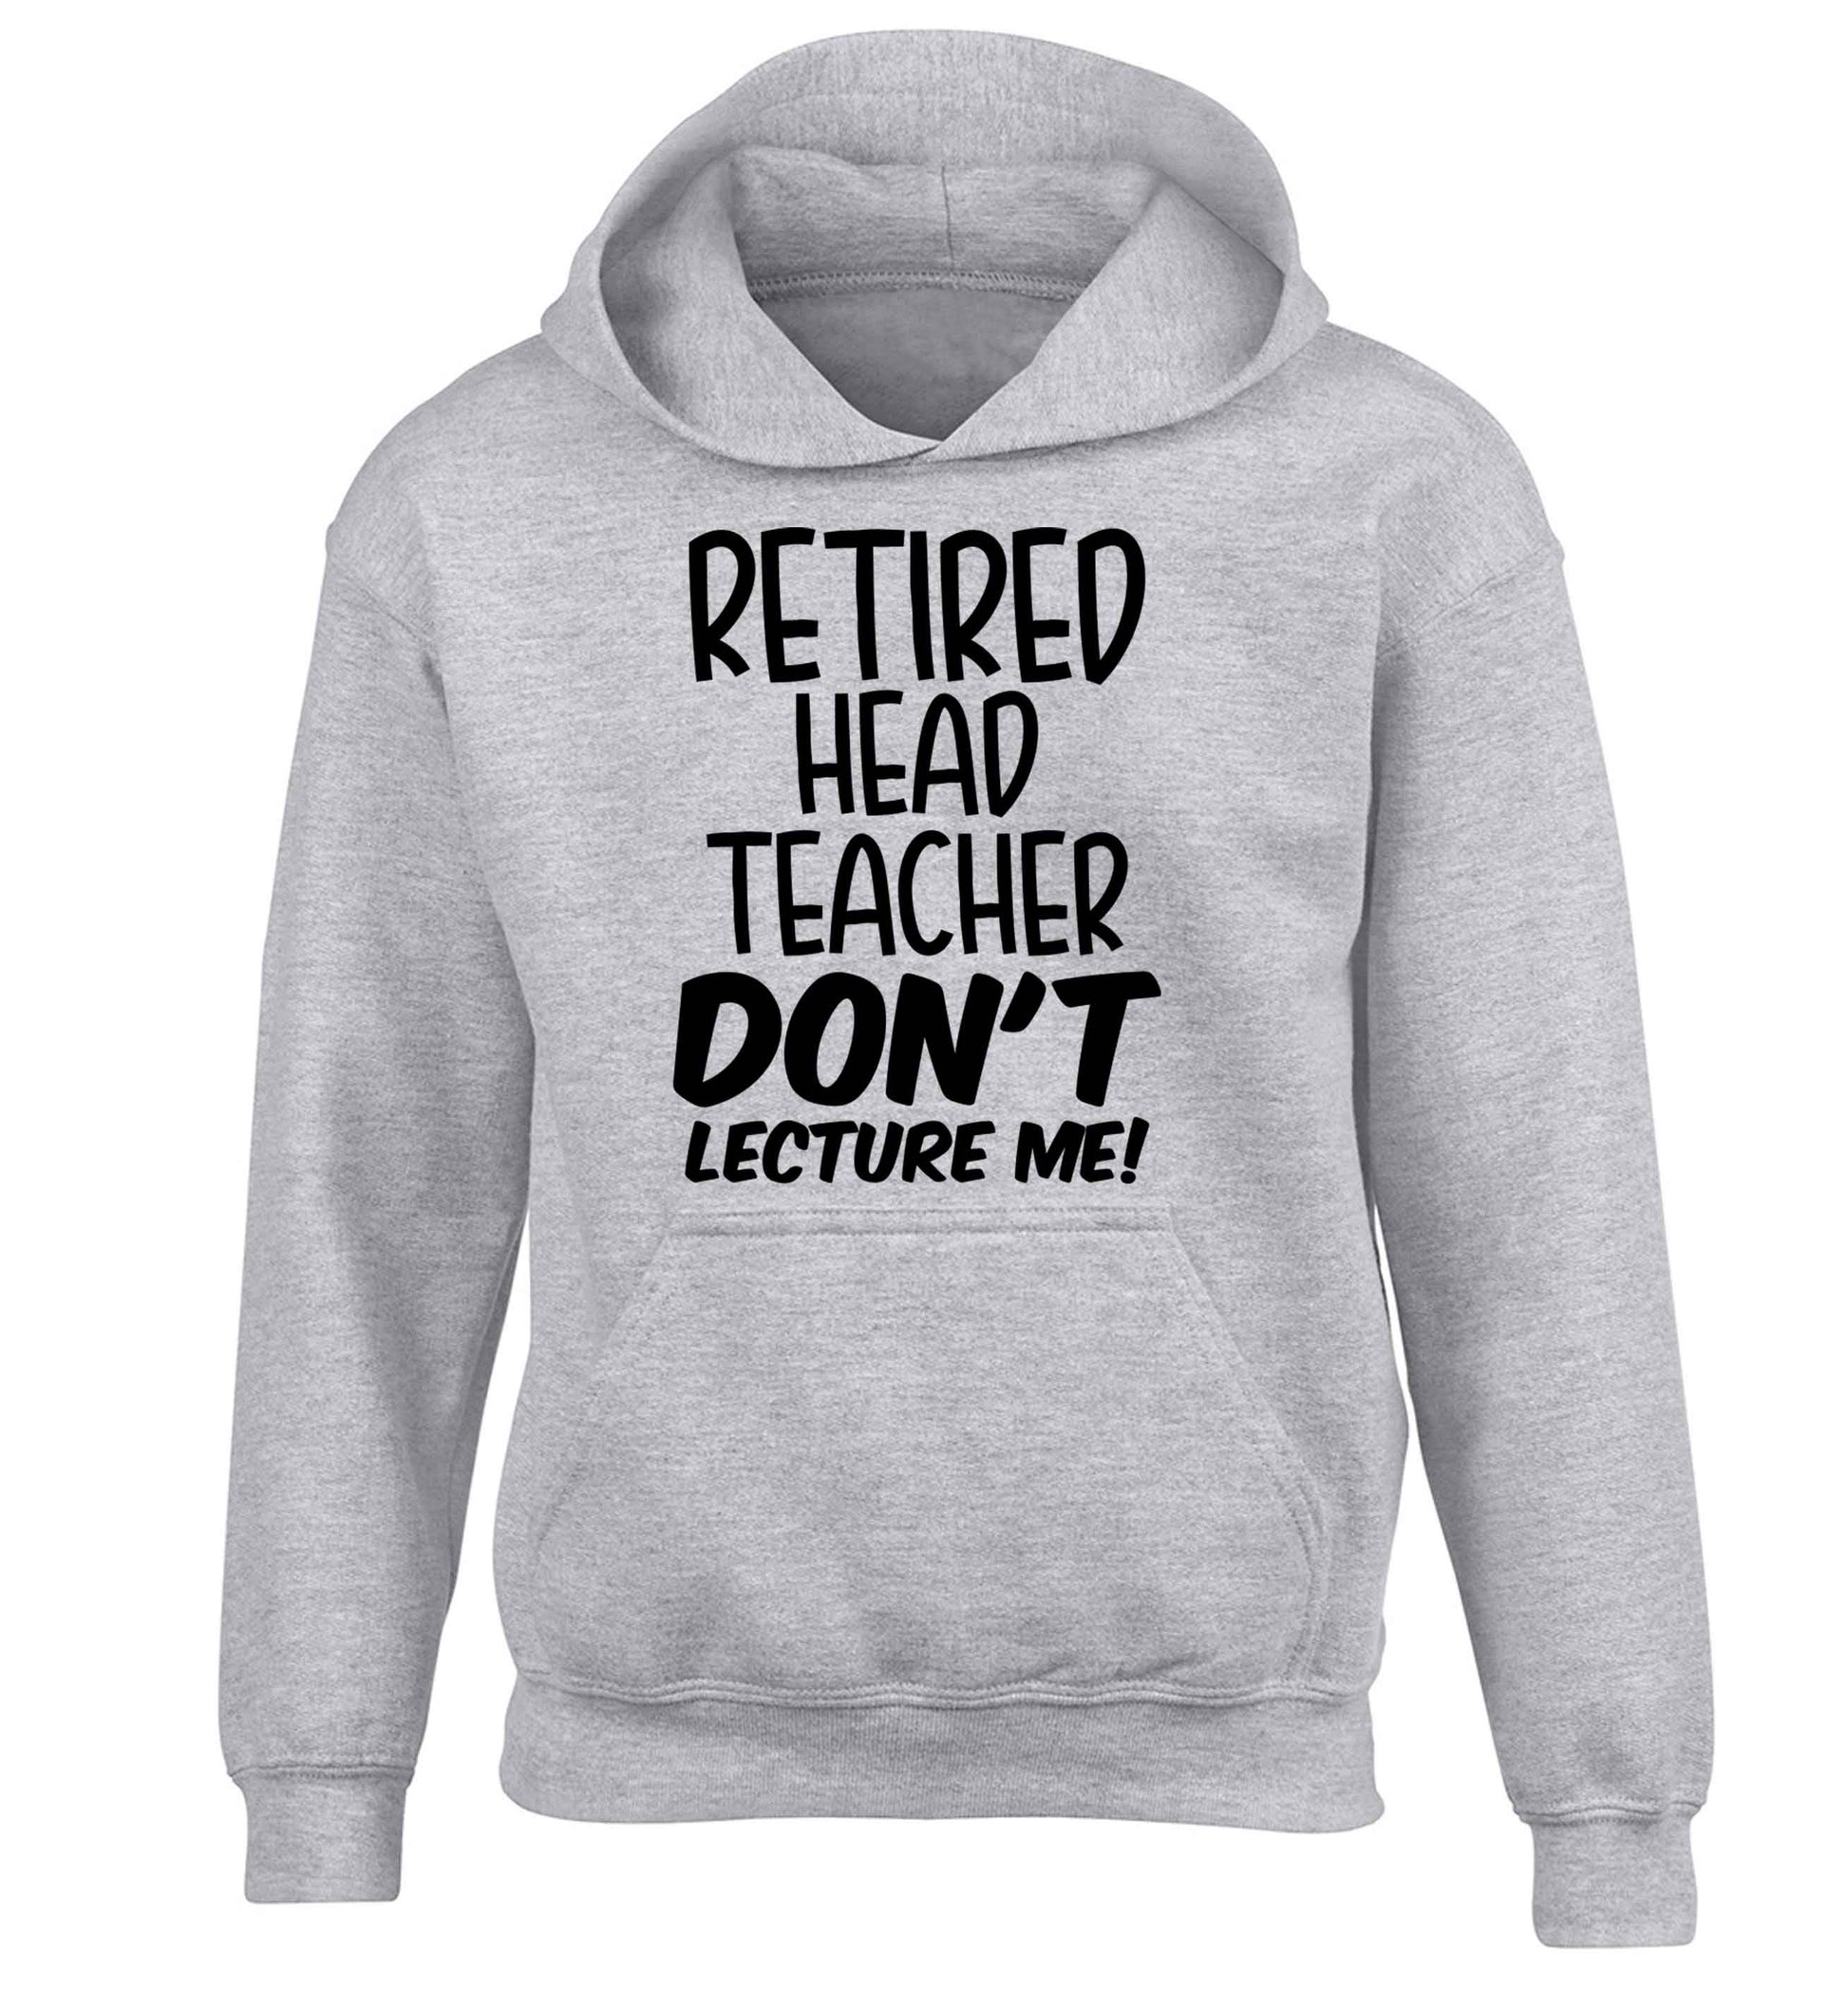 Retired head teacher don't lecture me! children's grey hoodie 12-13 Years